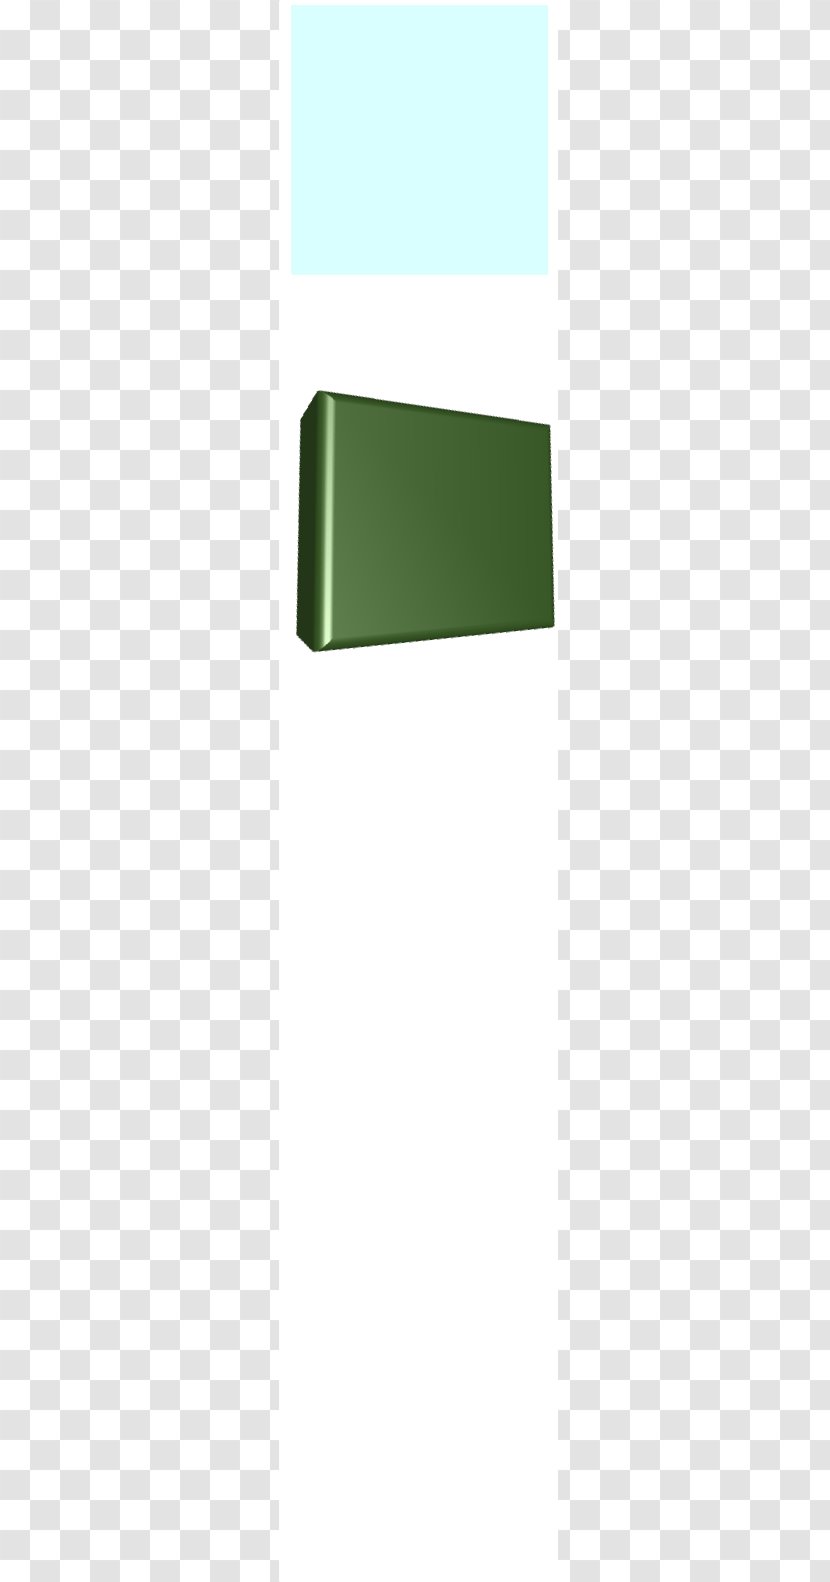 Rectangle - Grass - Golf Tee Pictures Transparent PNG